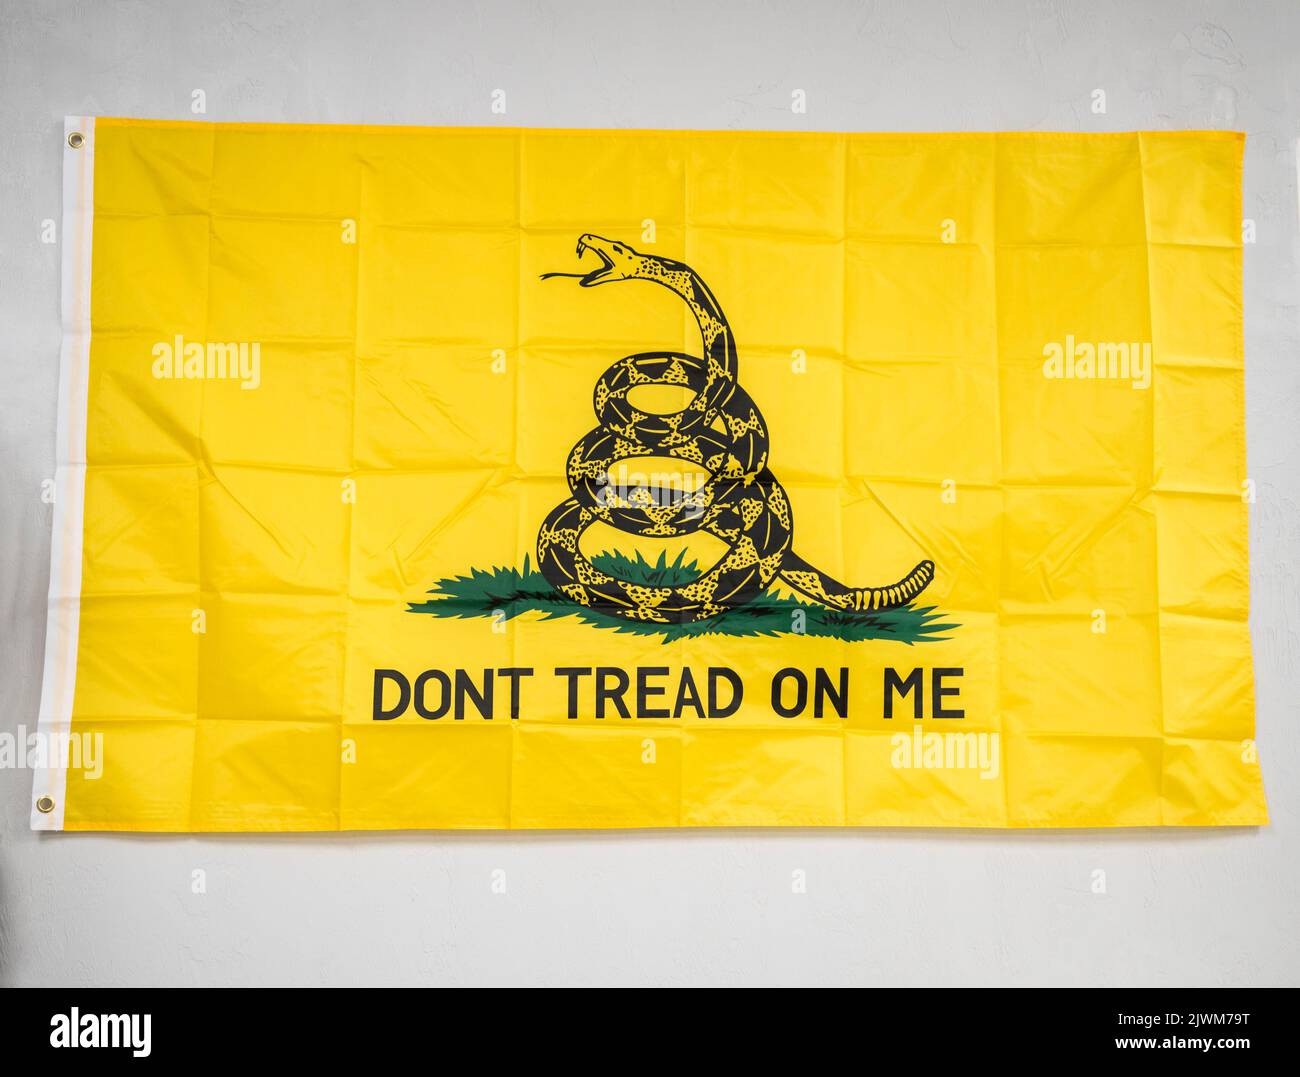 Although often referred to as the “Don’t Tread on Me” flag, the correct name is the Gadsden flag, named after its designer, Christopher Gadsden. Stock Photo